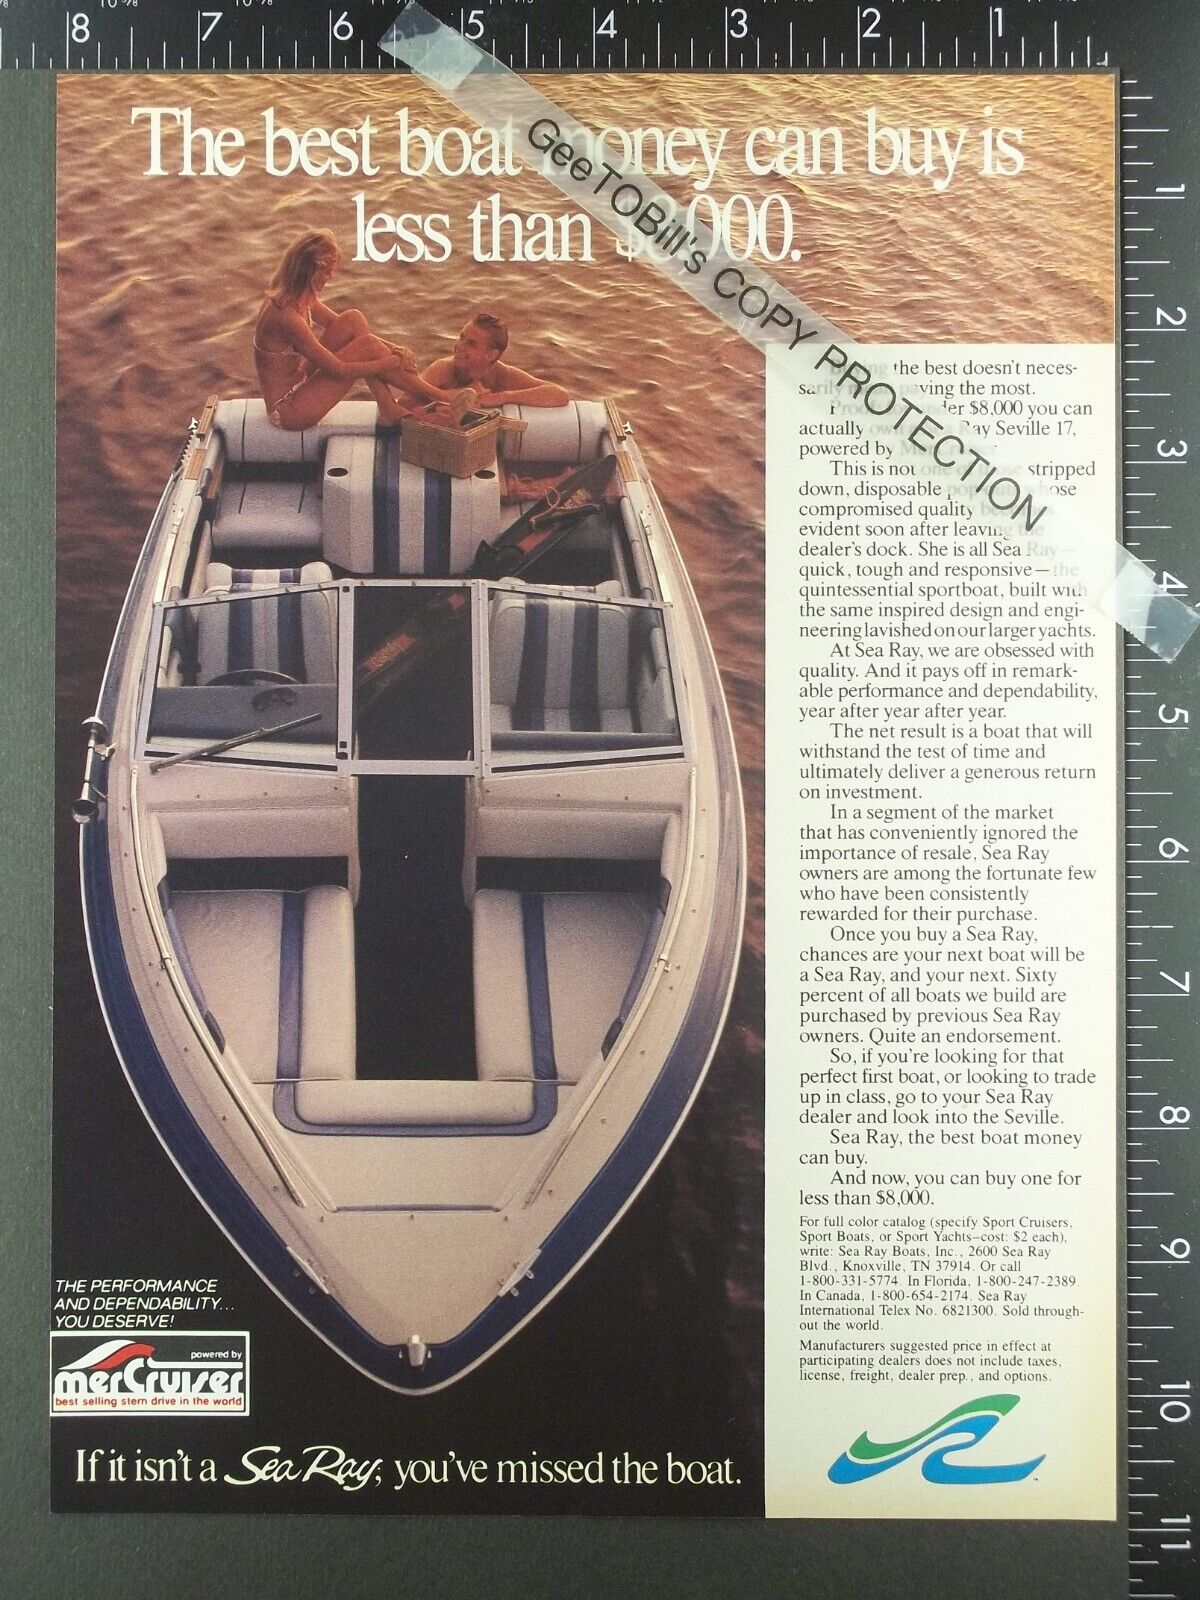 1987 ADVERTISING for Sea Ray Seville 17 motor yacht boat